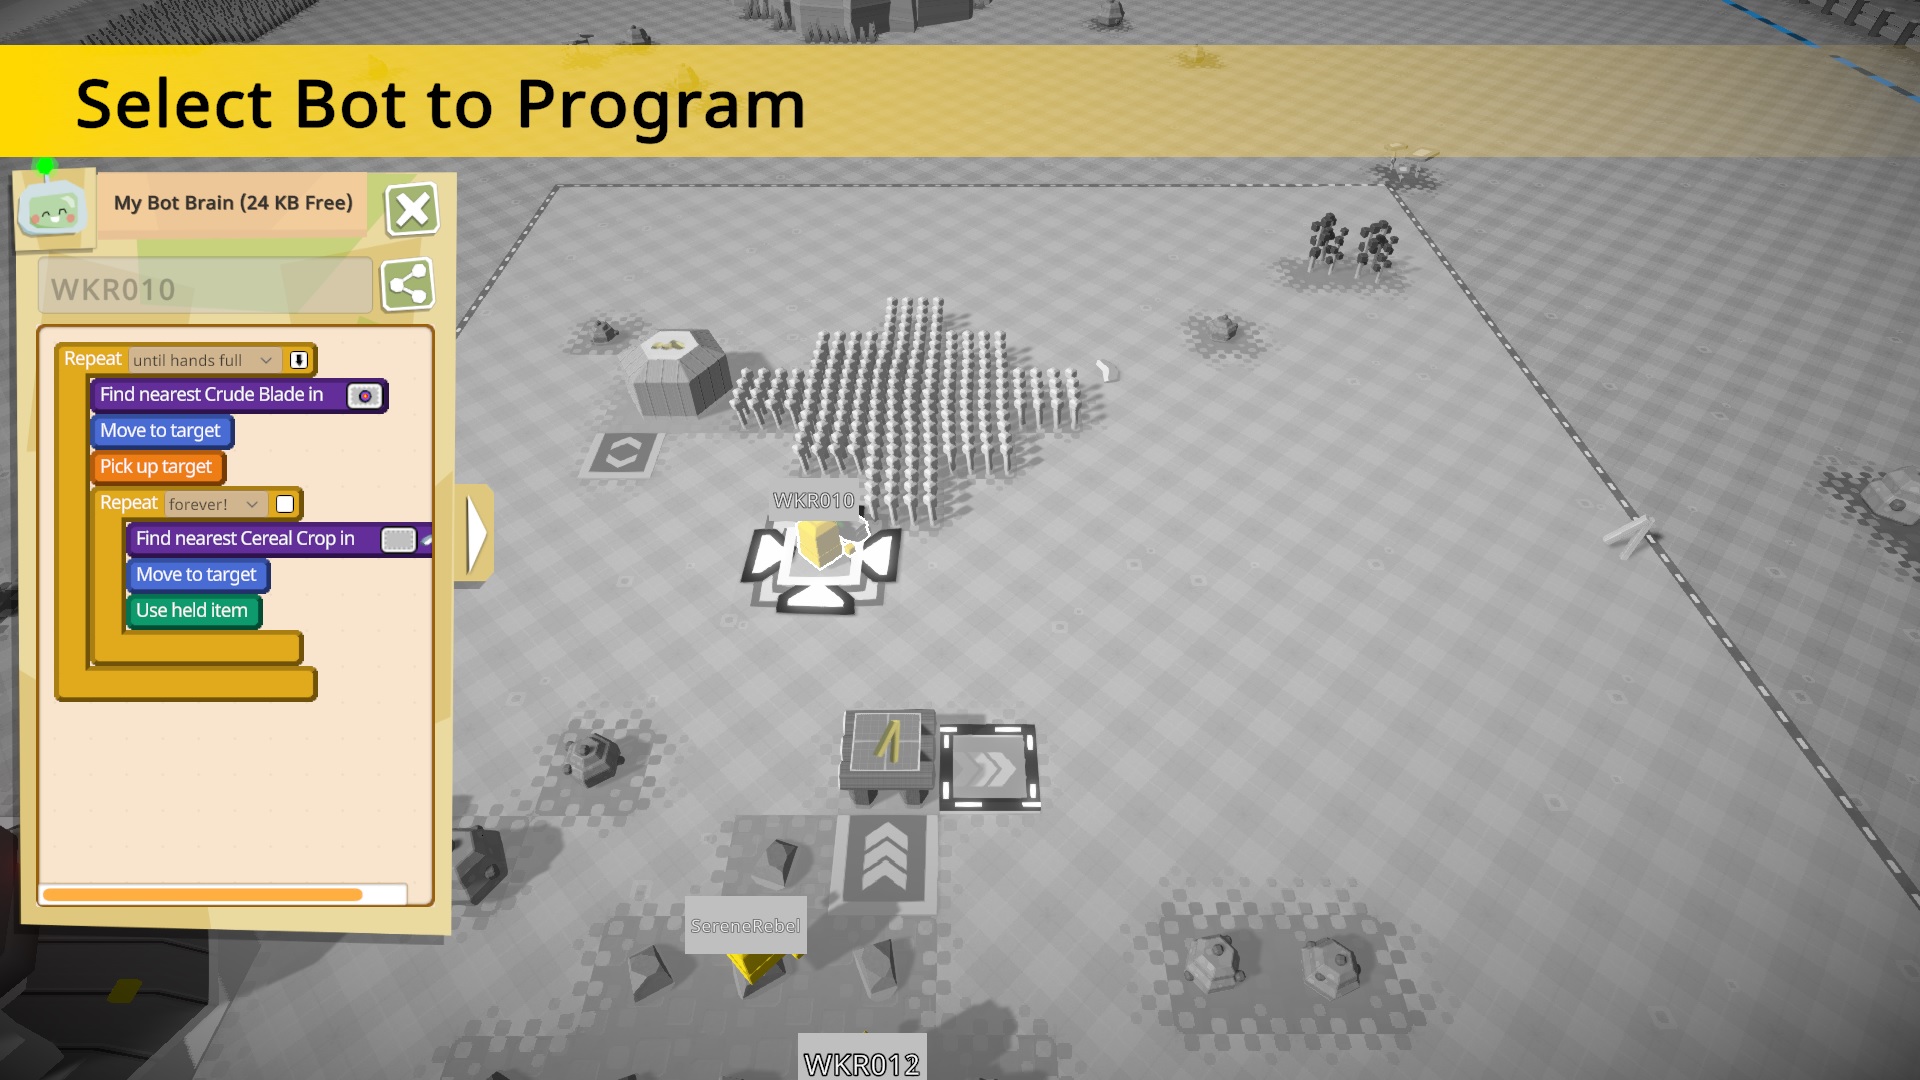 NEW* ALL WORKING CODES FOR BEE SWARM SIMULATOR SEPTEMBER 2022